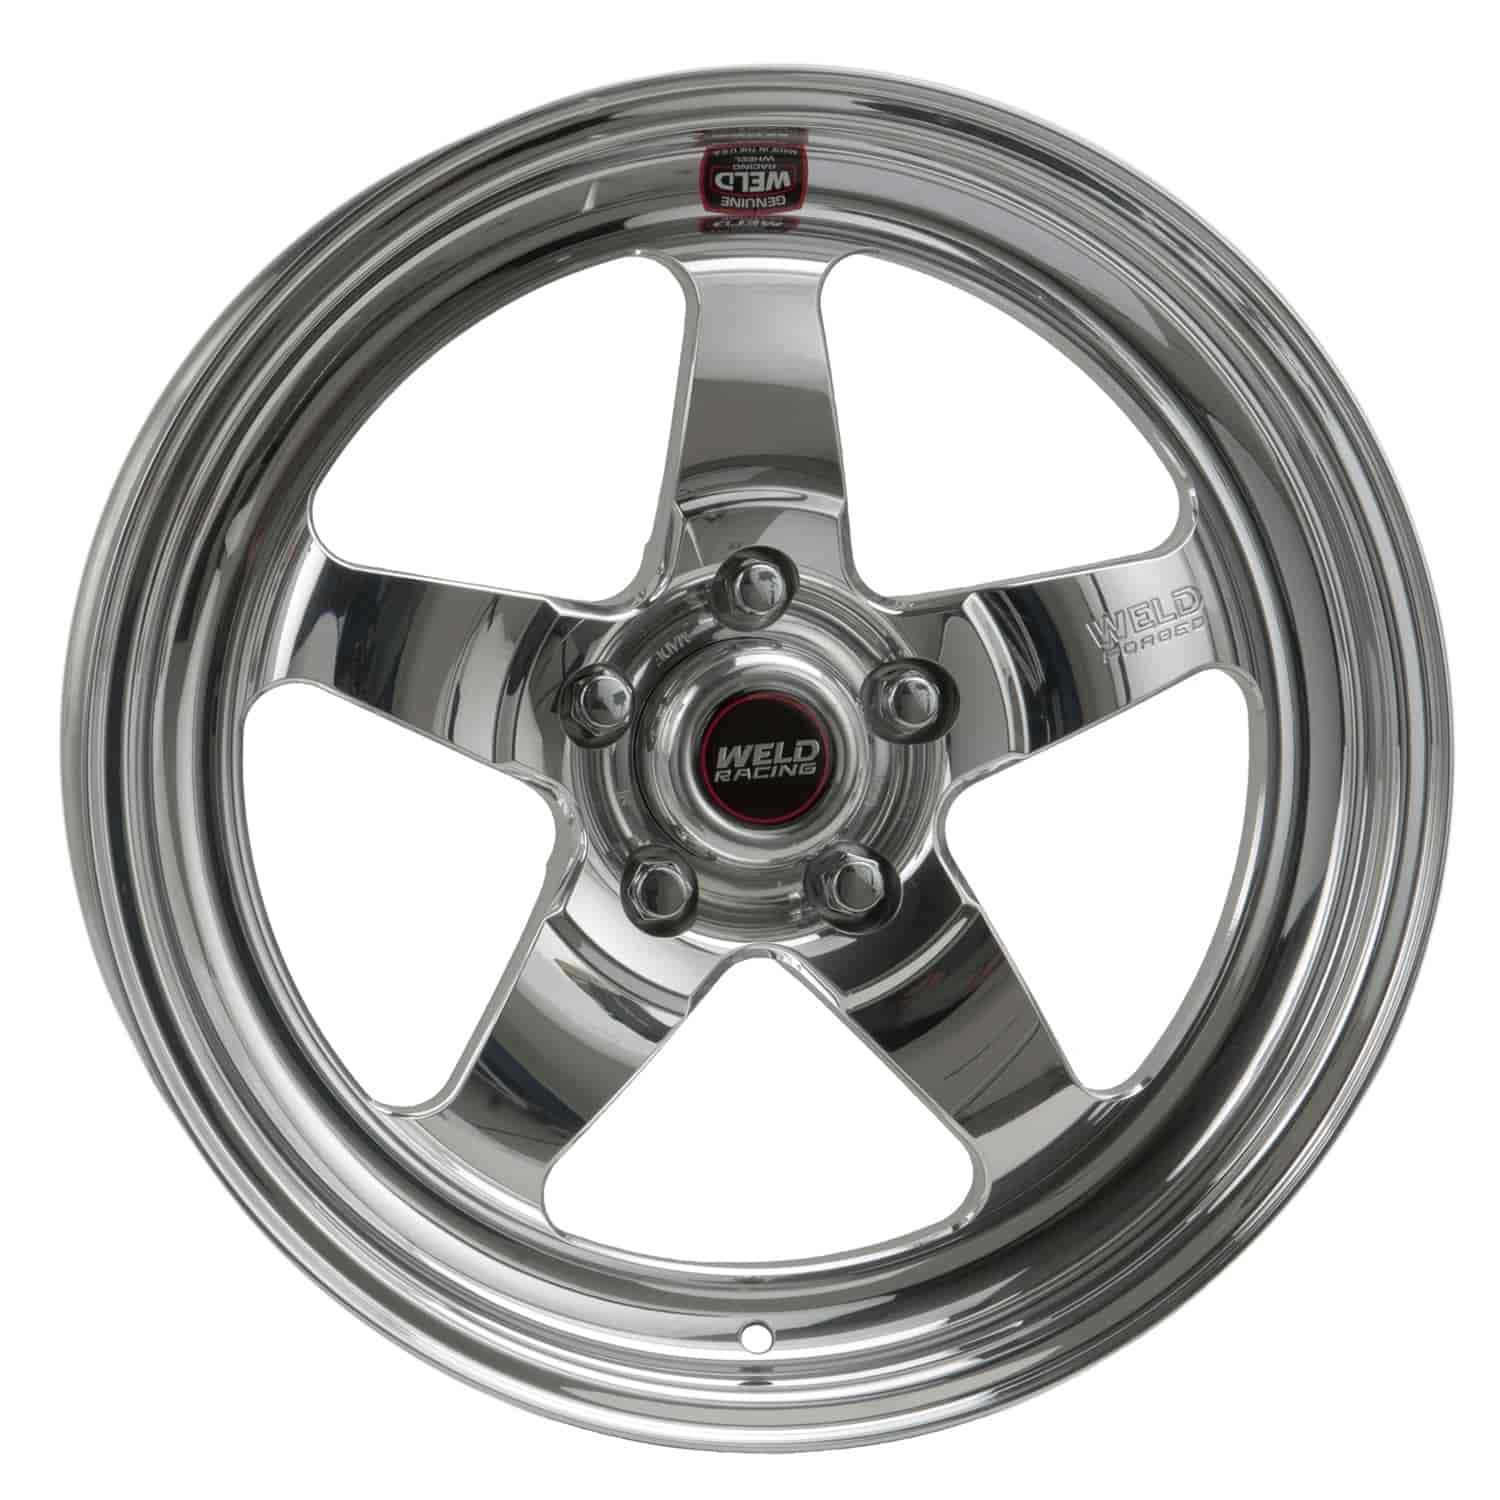 RT-S Series Wheel Size: 15" x 10" Bolt Circle: 5 x 4-1/2" Rear Spacing: 6-1/2" Offset: +21.91mm